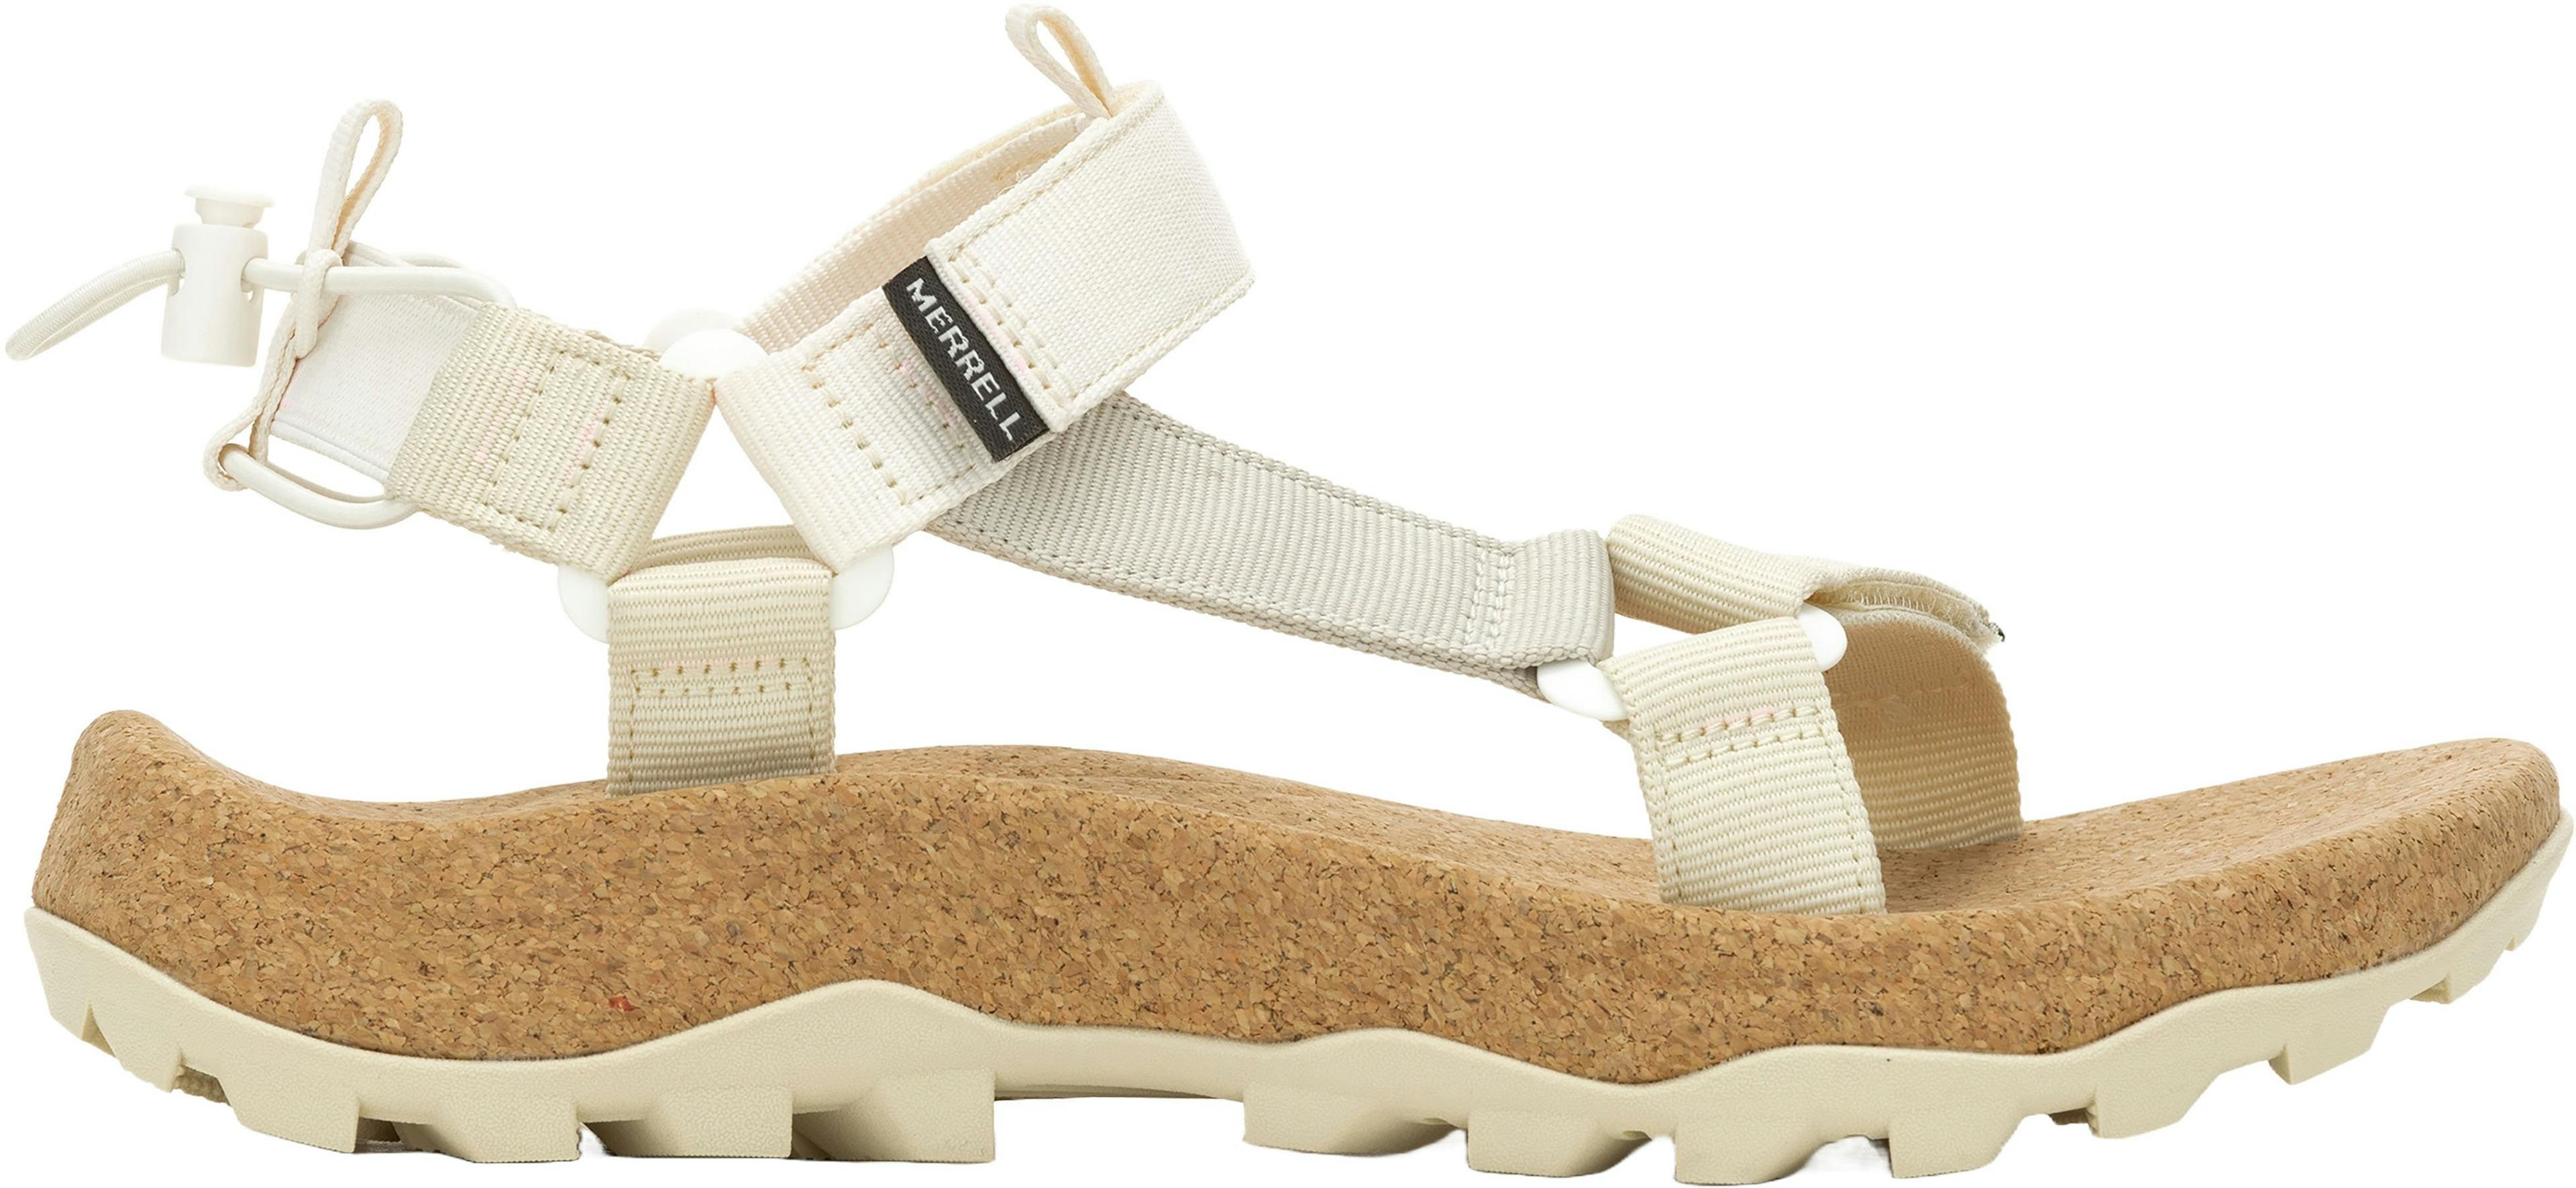 Product image for Speed Fusion Web Sandals - Women's